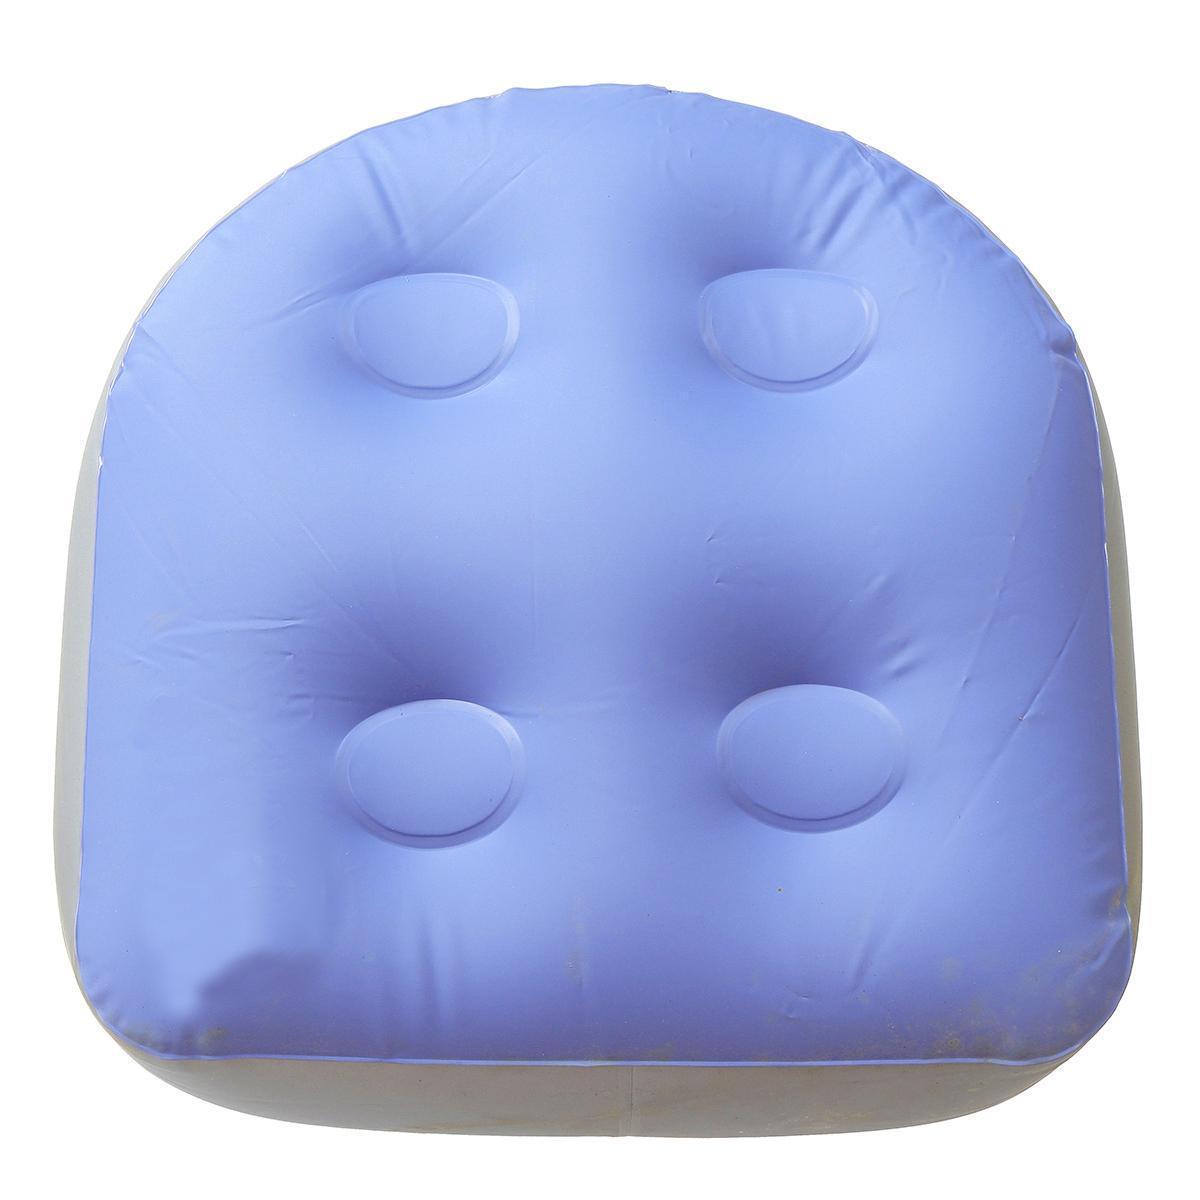 SPA BOOSTER SEAT